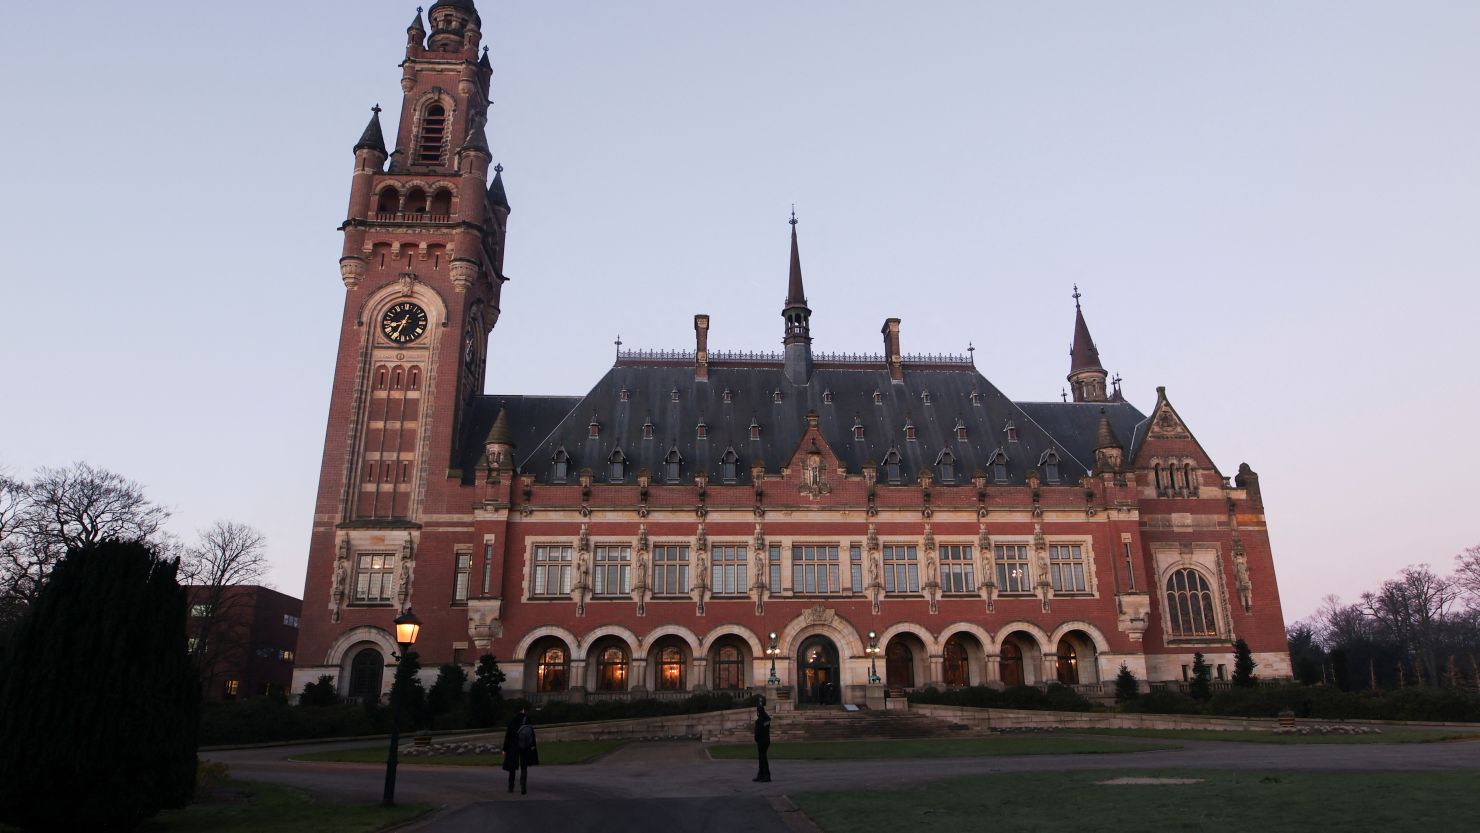 The International Court of Justice (ICJ) in The Hague, Netherlands.